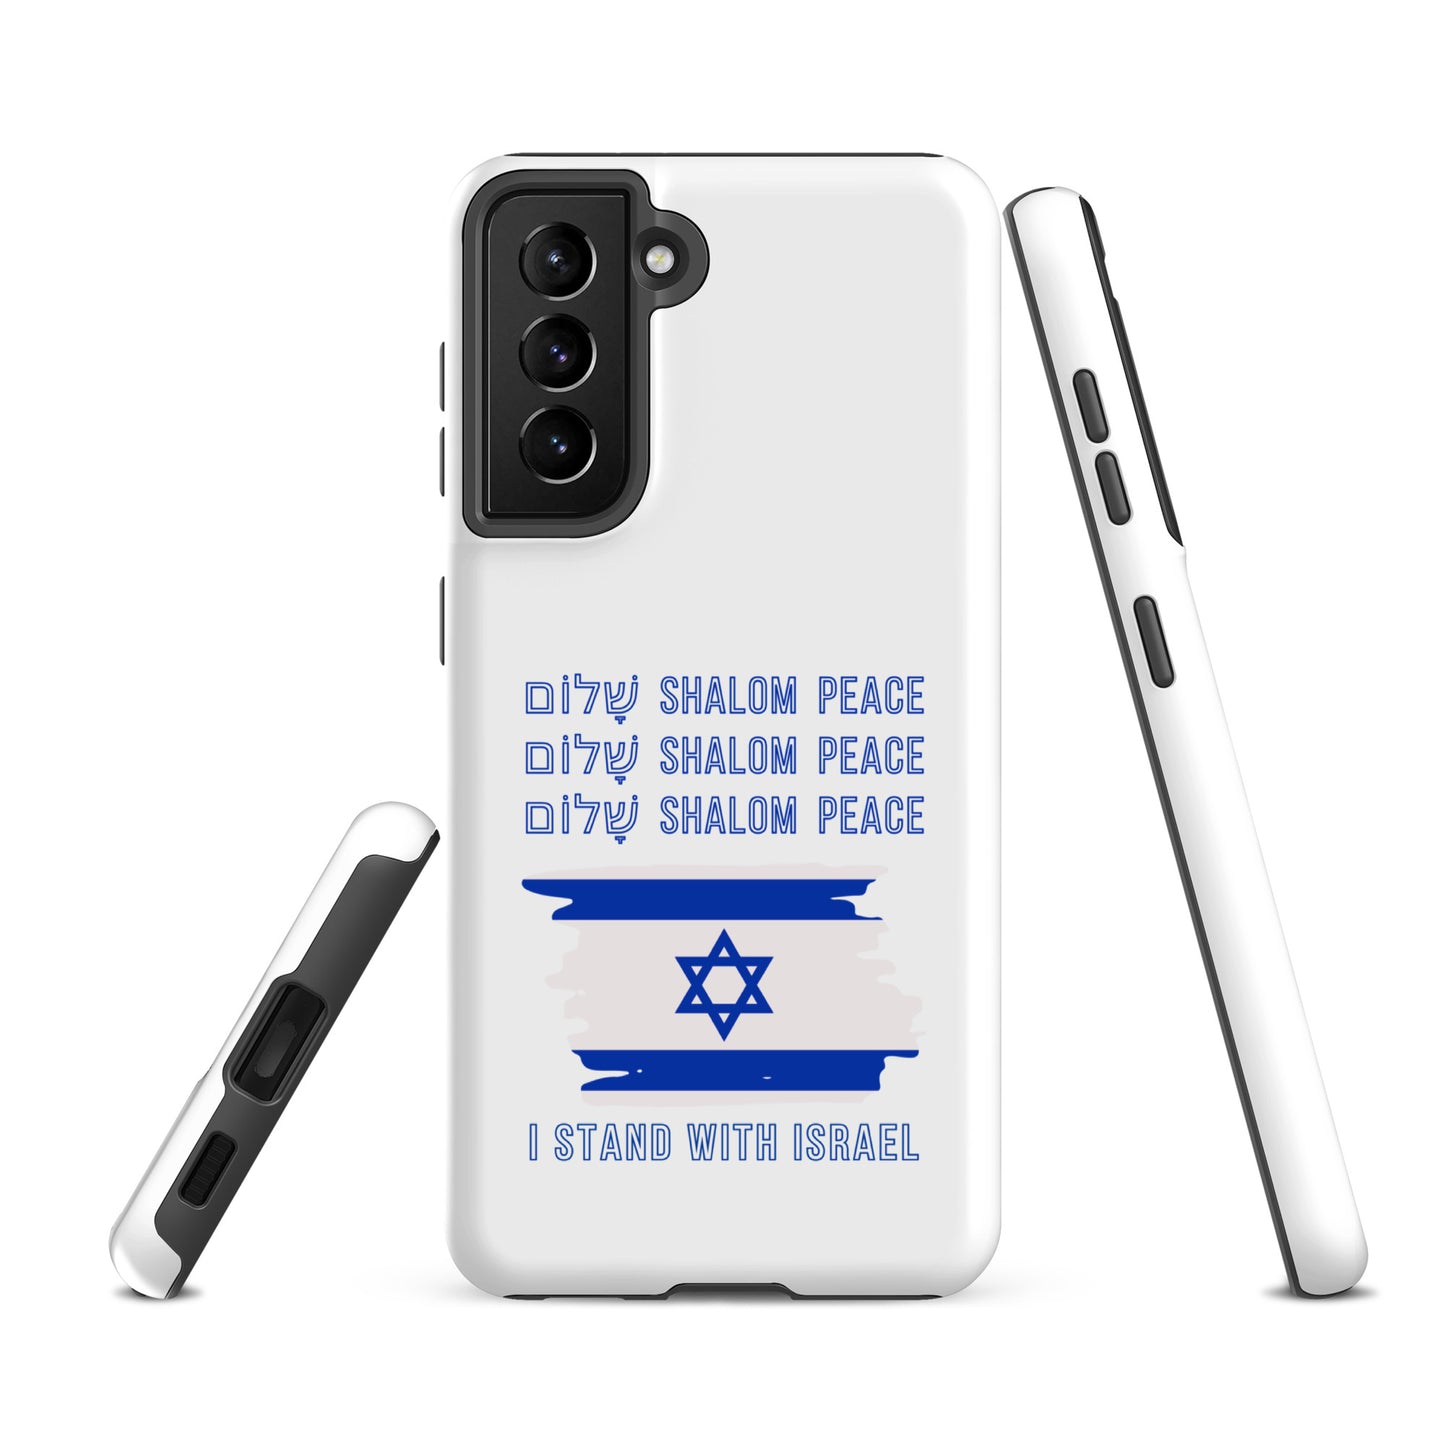 I STAND WITH ISRAEL 🇮🇱 Tough case for Samsung®